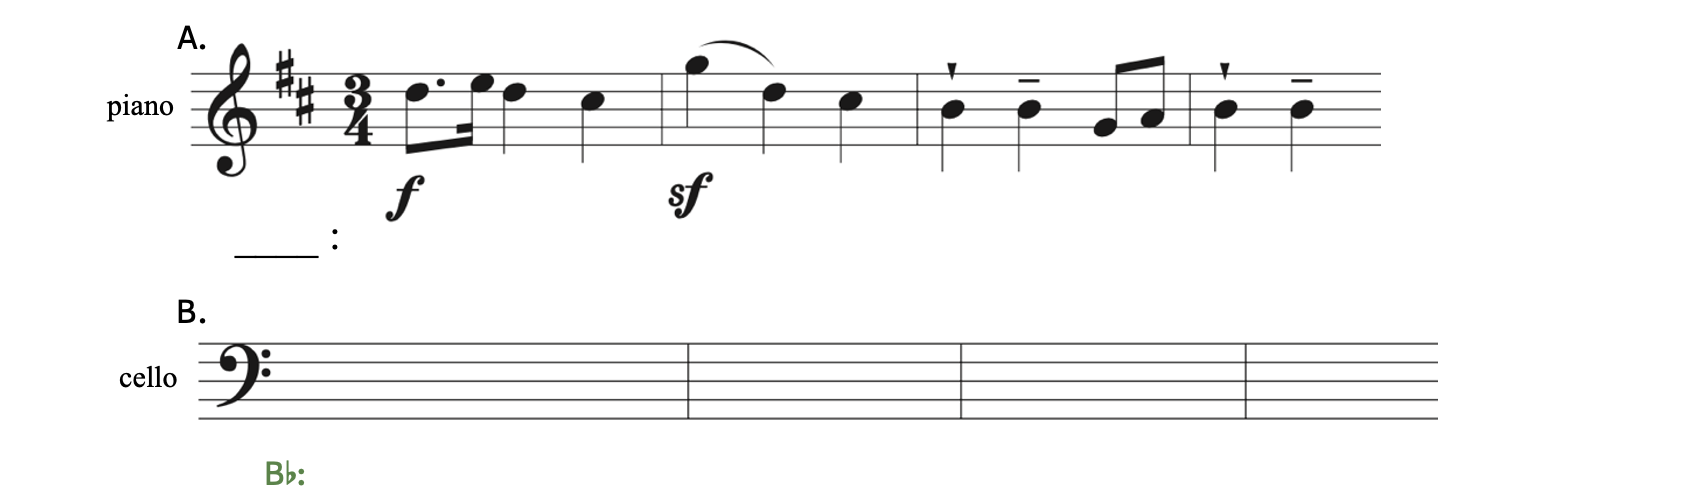 Transposing Munktell's Violin Sonata, second movement - Moderato energico. Example A is in treble clef with two sharps. You are to transpose to Example B in bass clef and B-flat major.